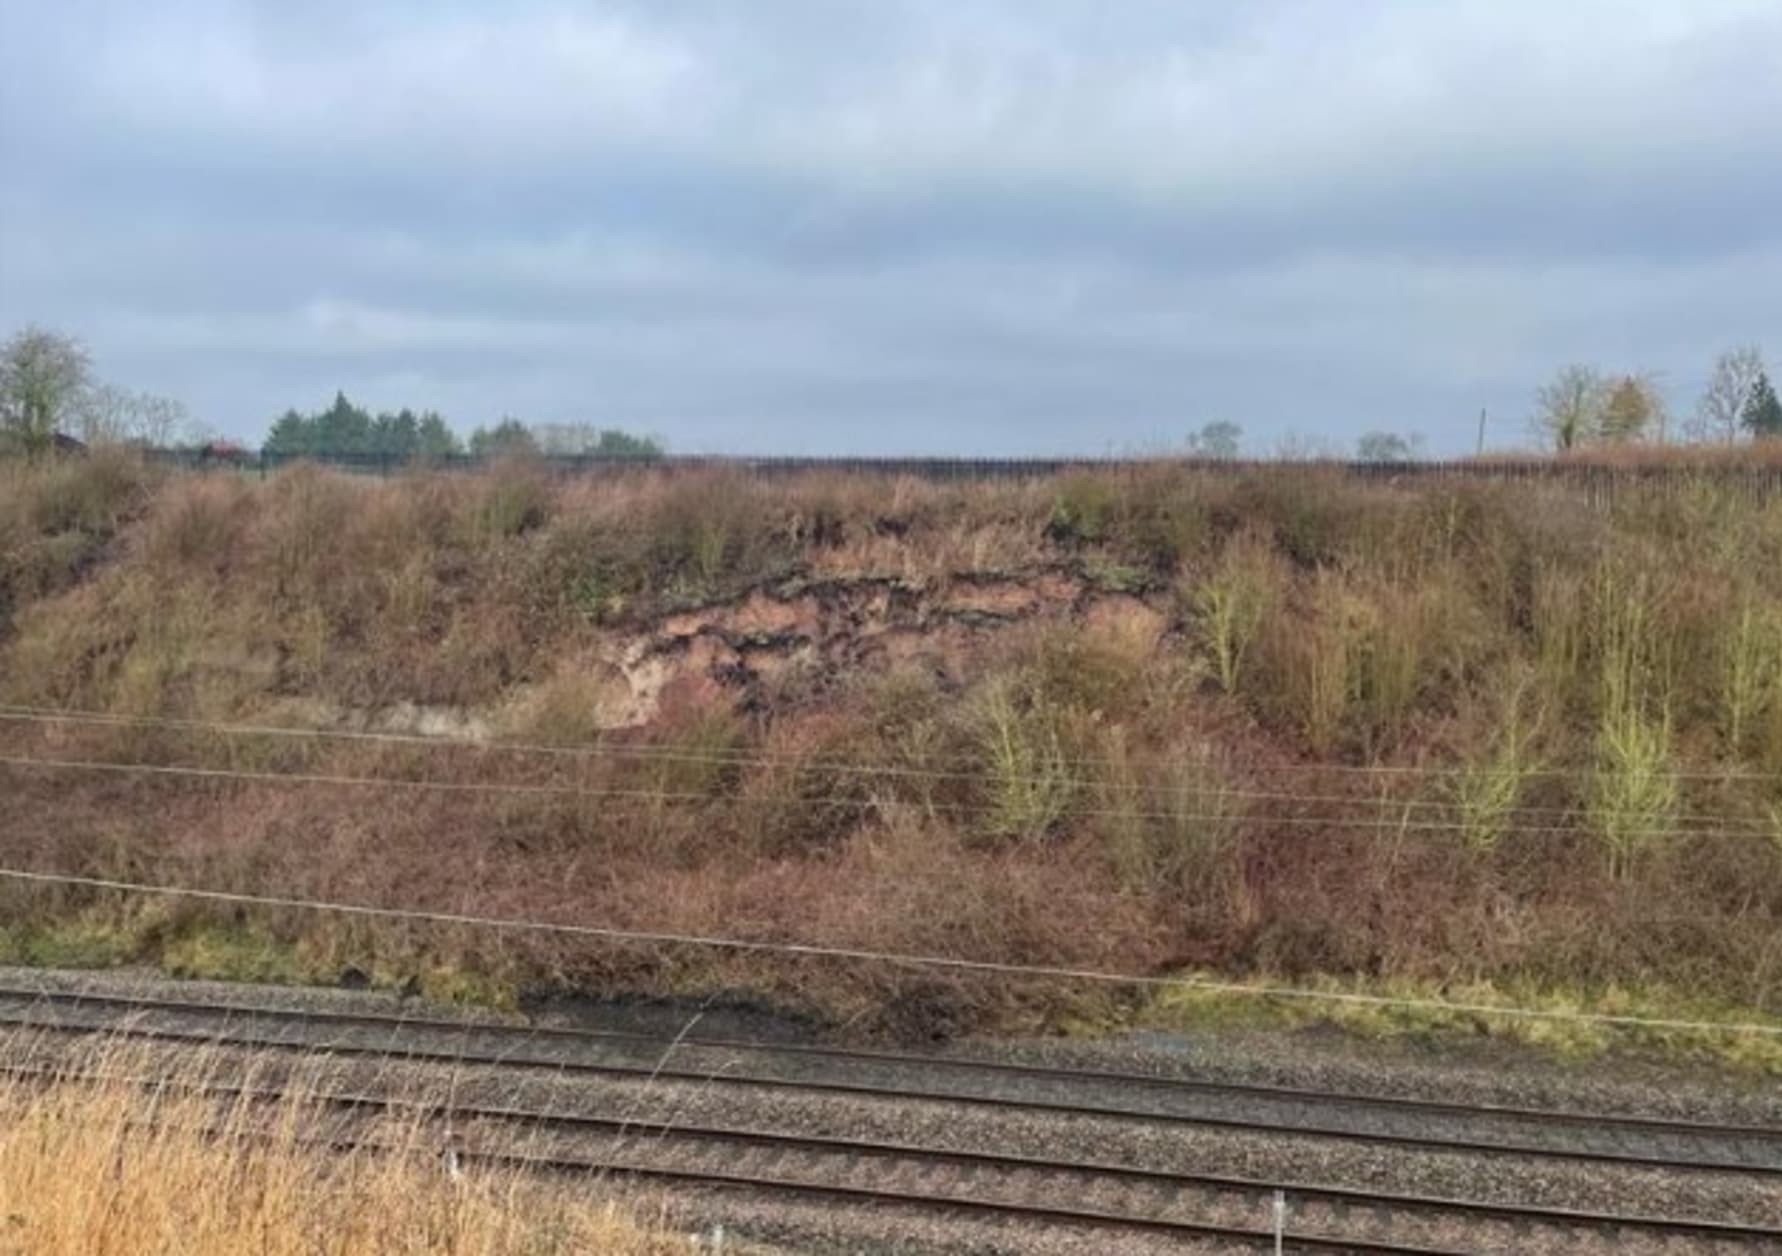 Passengers urged to check before travelling as landslip causes travel disruption between Birmingham and London